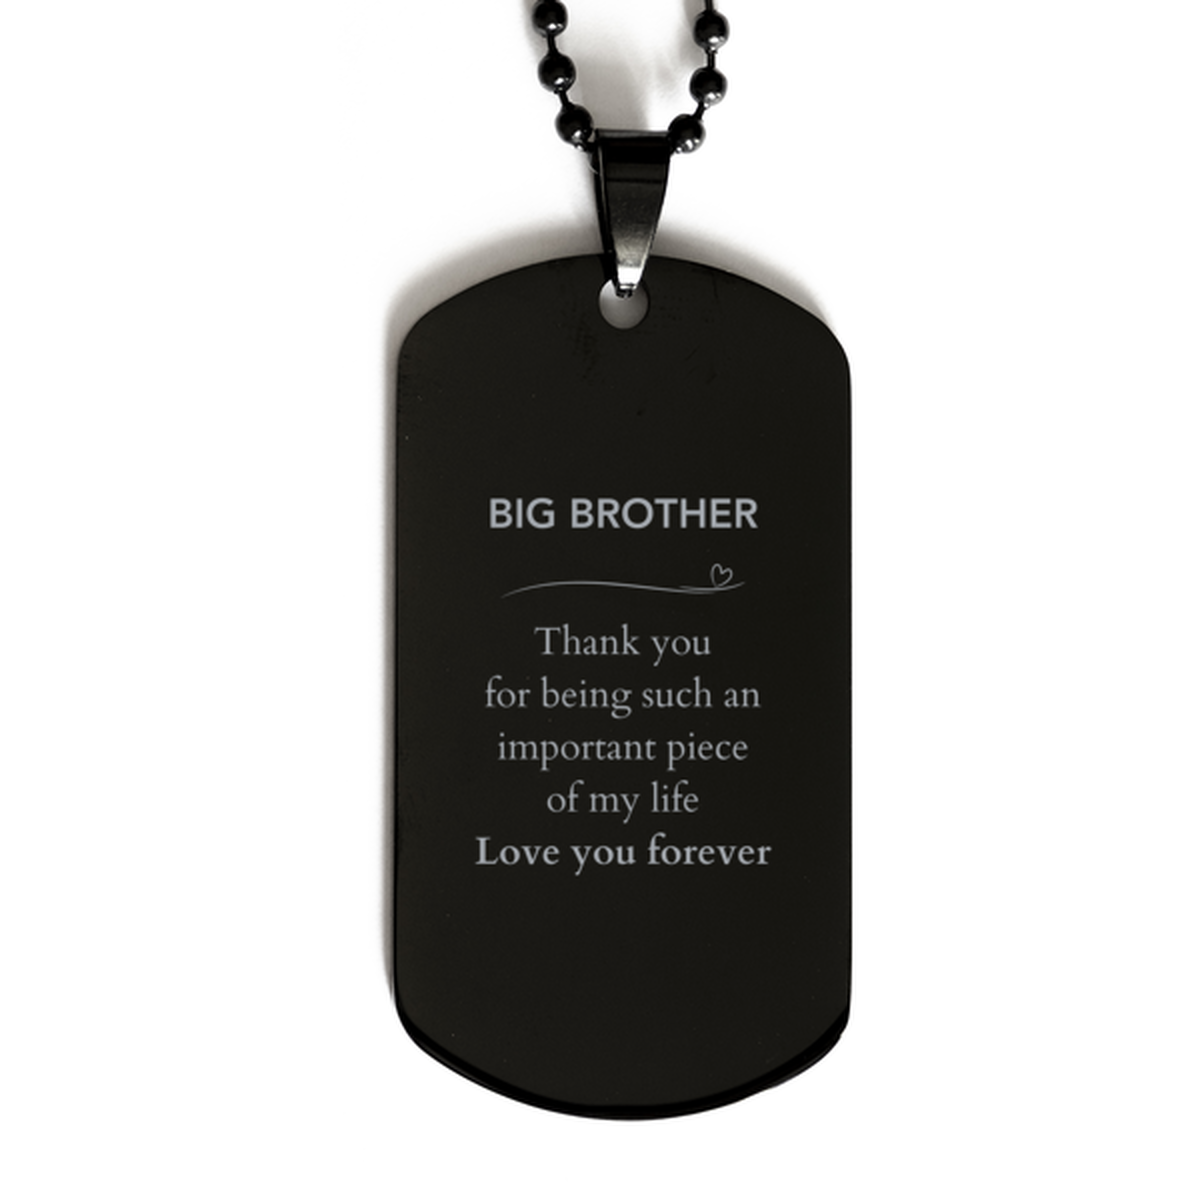 Appropriate Big Brother Black Dog Tag Epic Birthday Gifts for Big Brother Thank you for being such an important piece of my life Big Brother Christmas Mothers Fathers Day